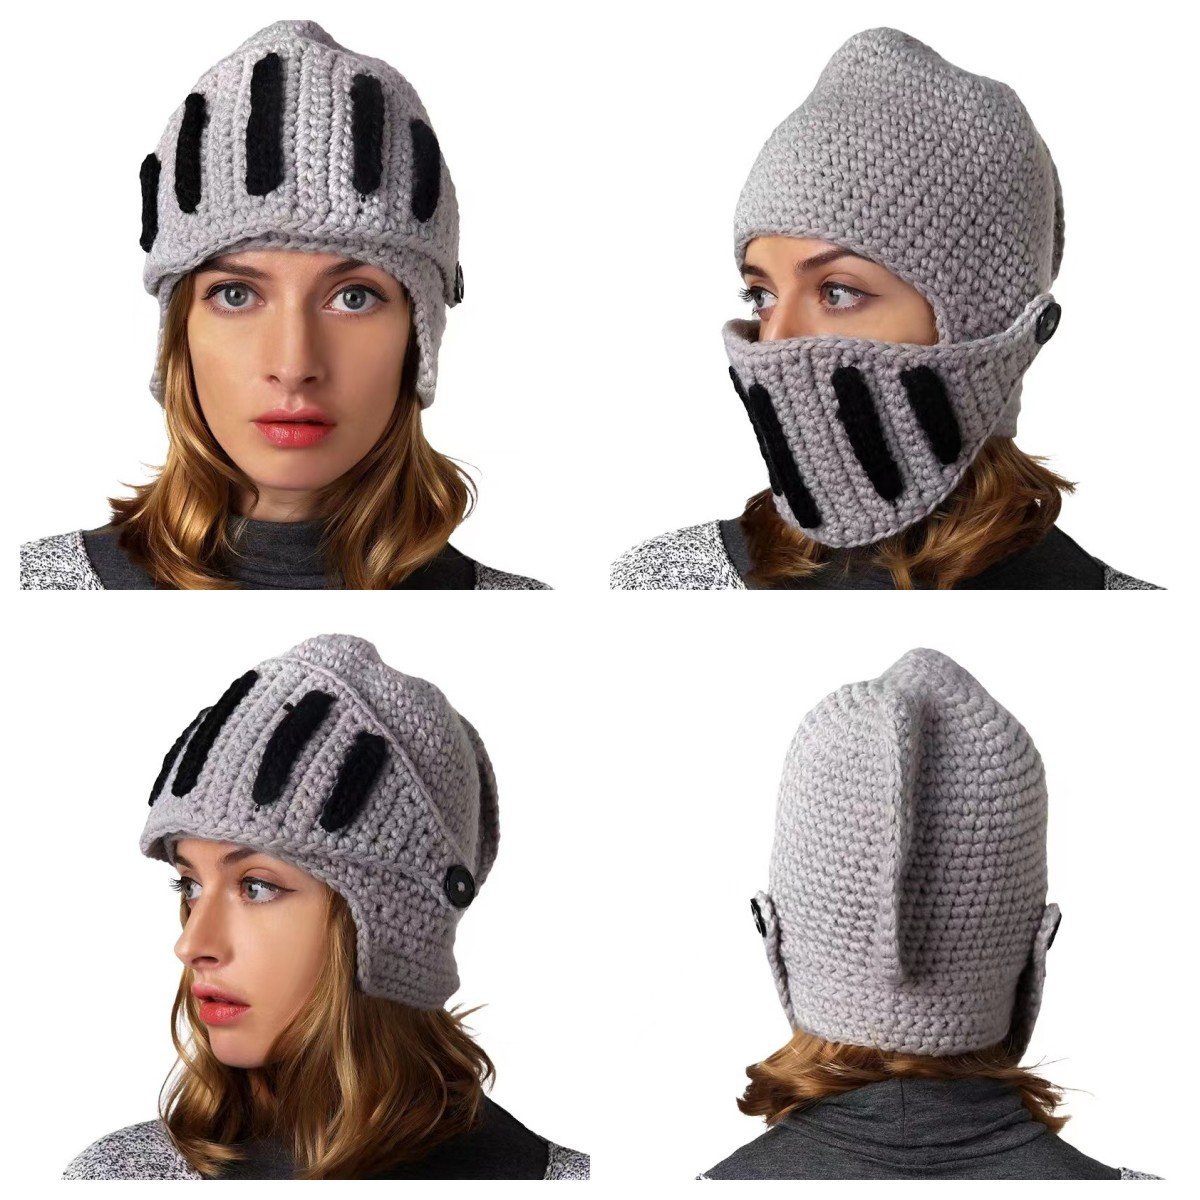 Hand-knitted knight hat